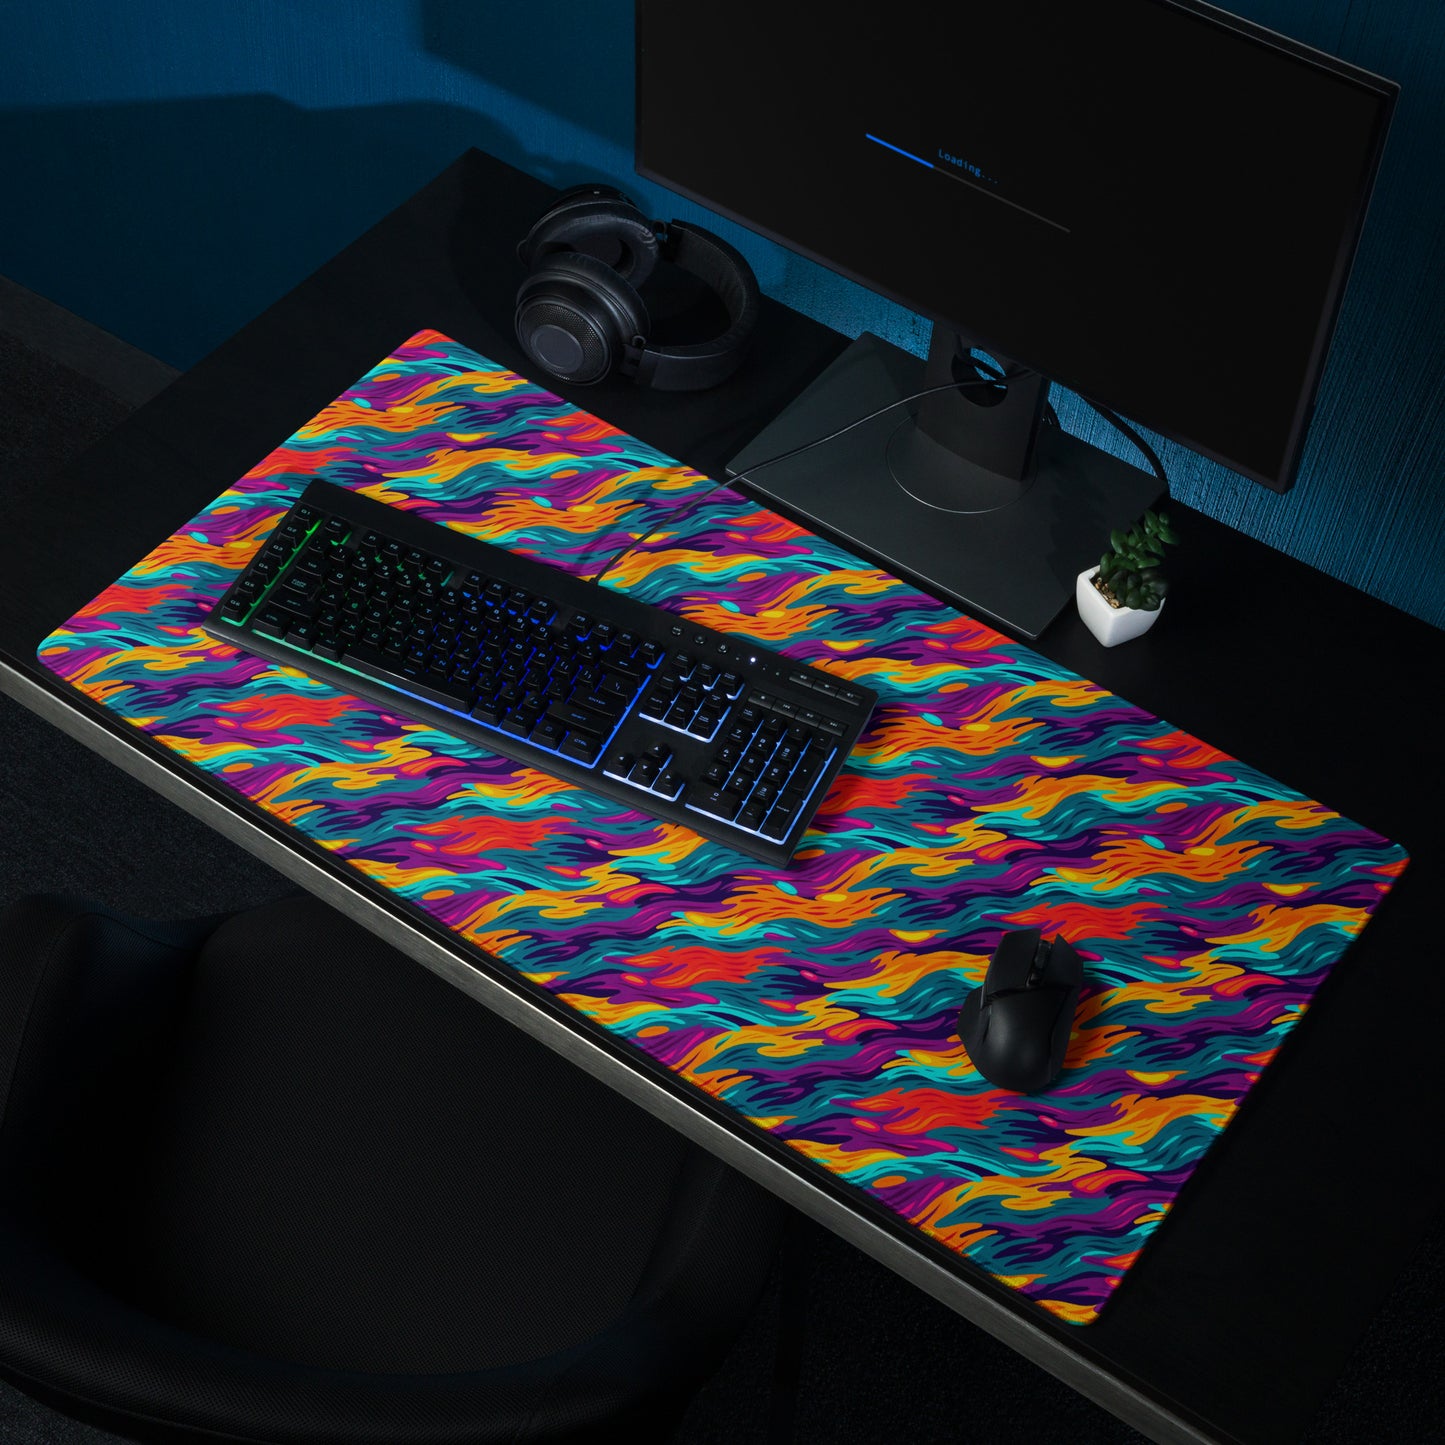 A 36" x 18" desk pad with a wavy flame pattern on it shown on a desk setup. Rainbow in color.